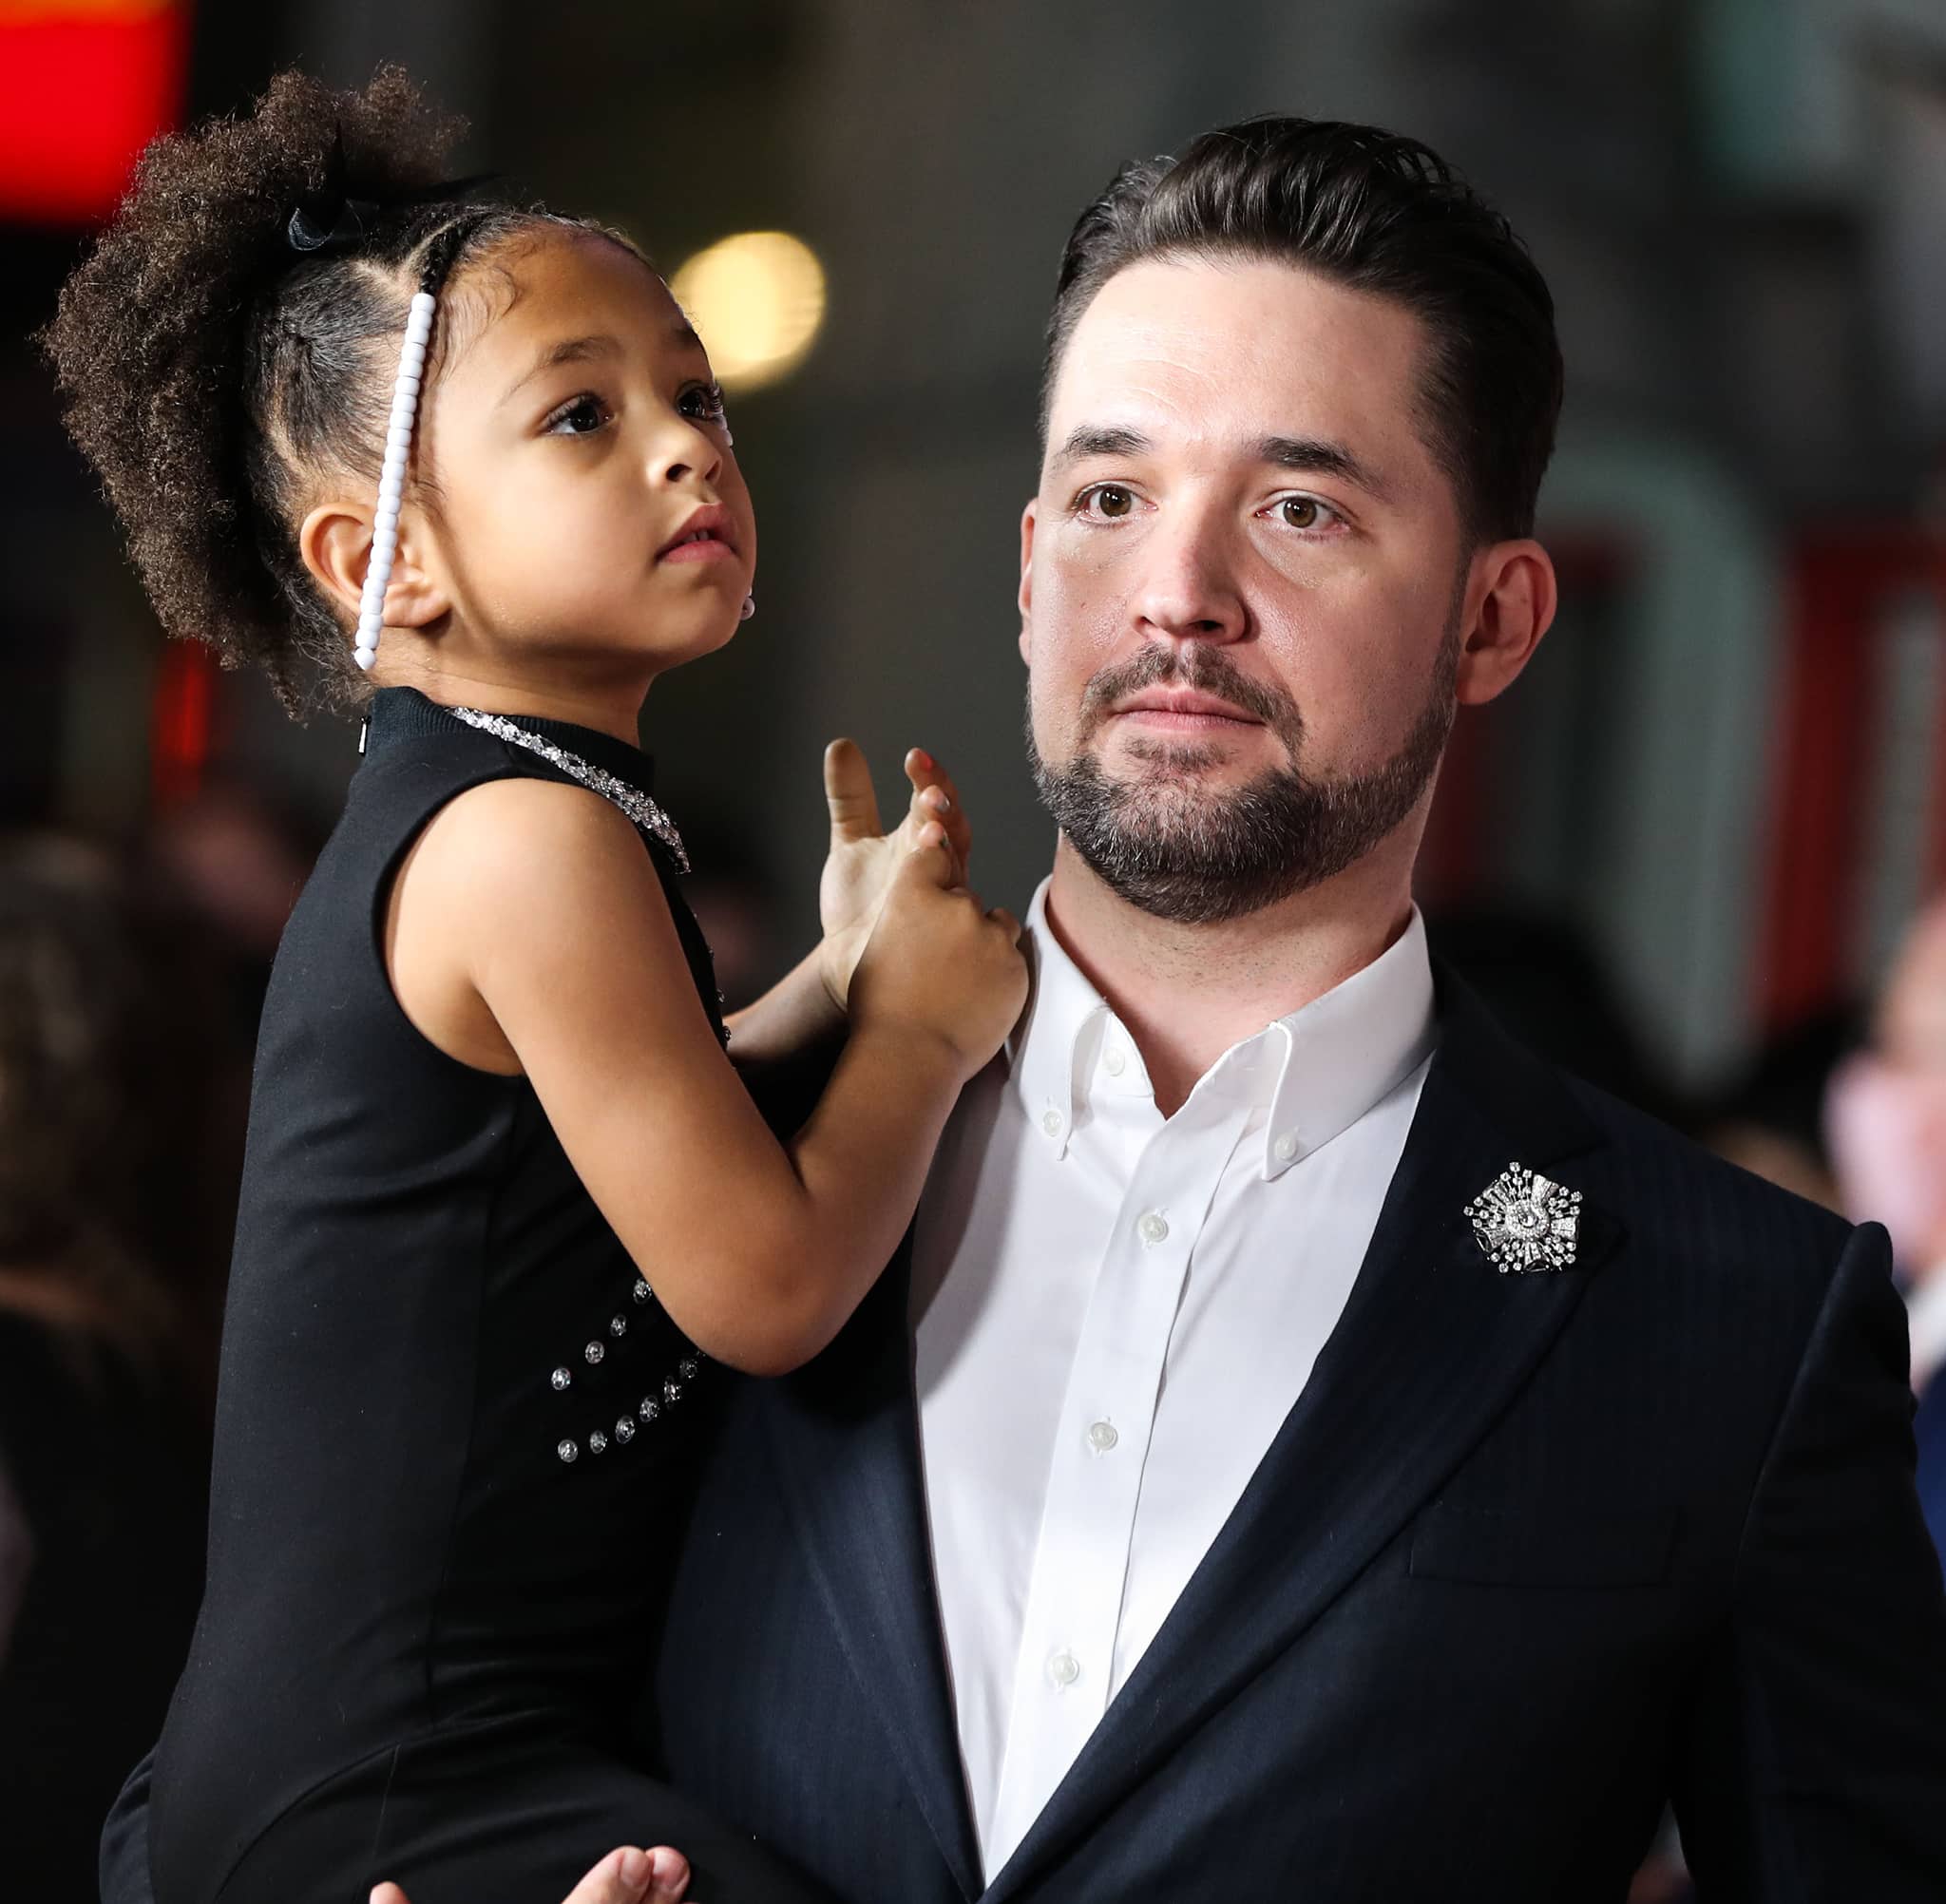 Olympia Ohanian mirrors her mom's outfit while Reddit co-founder Alexis Ohanian dons a navy pinstripe suit